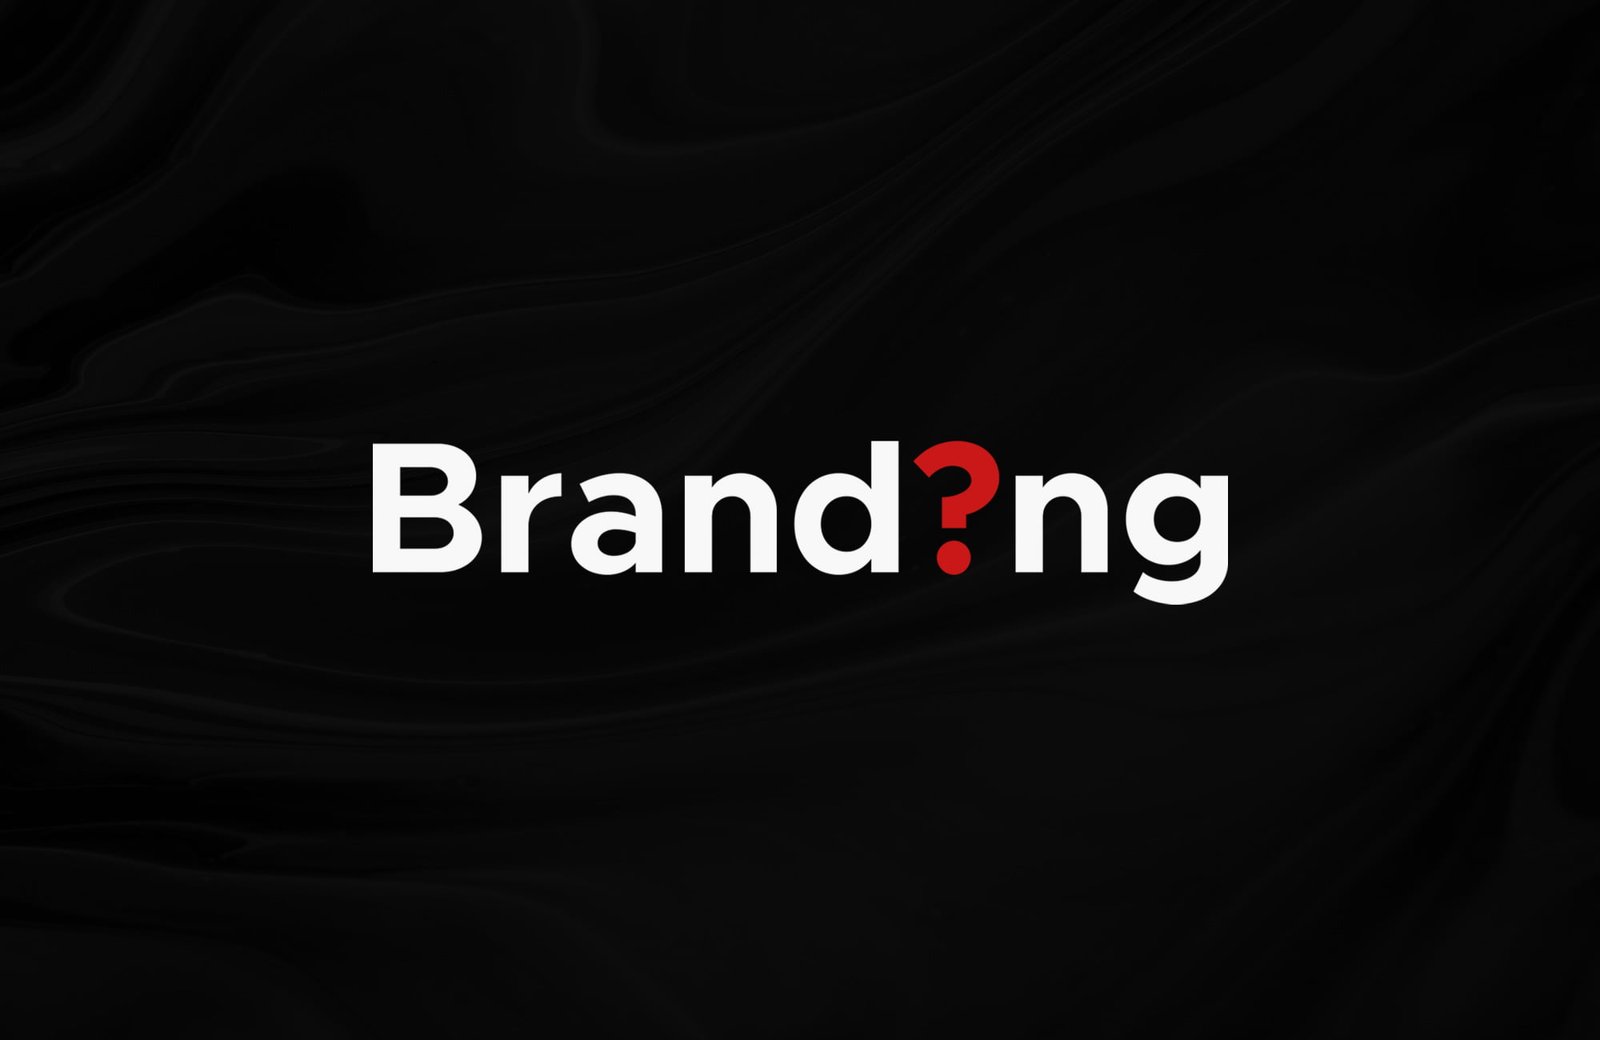 What is branding